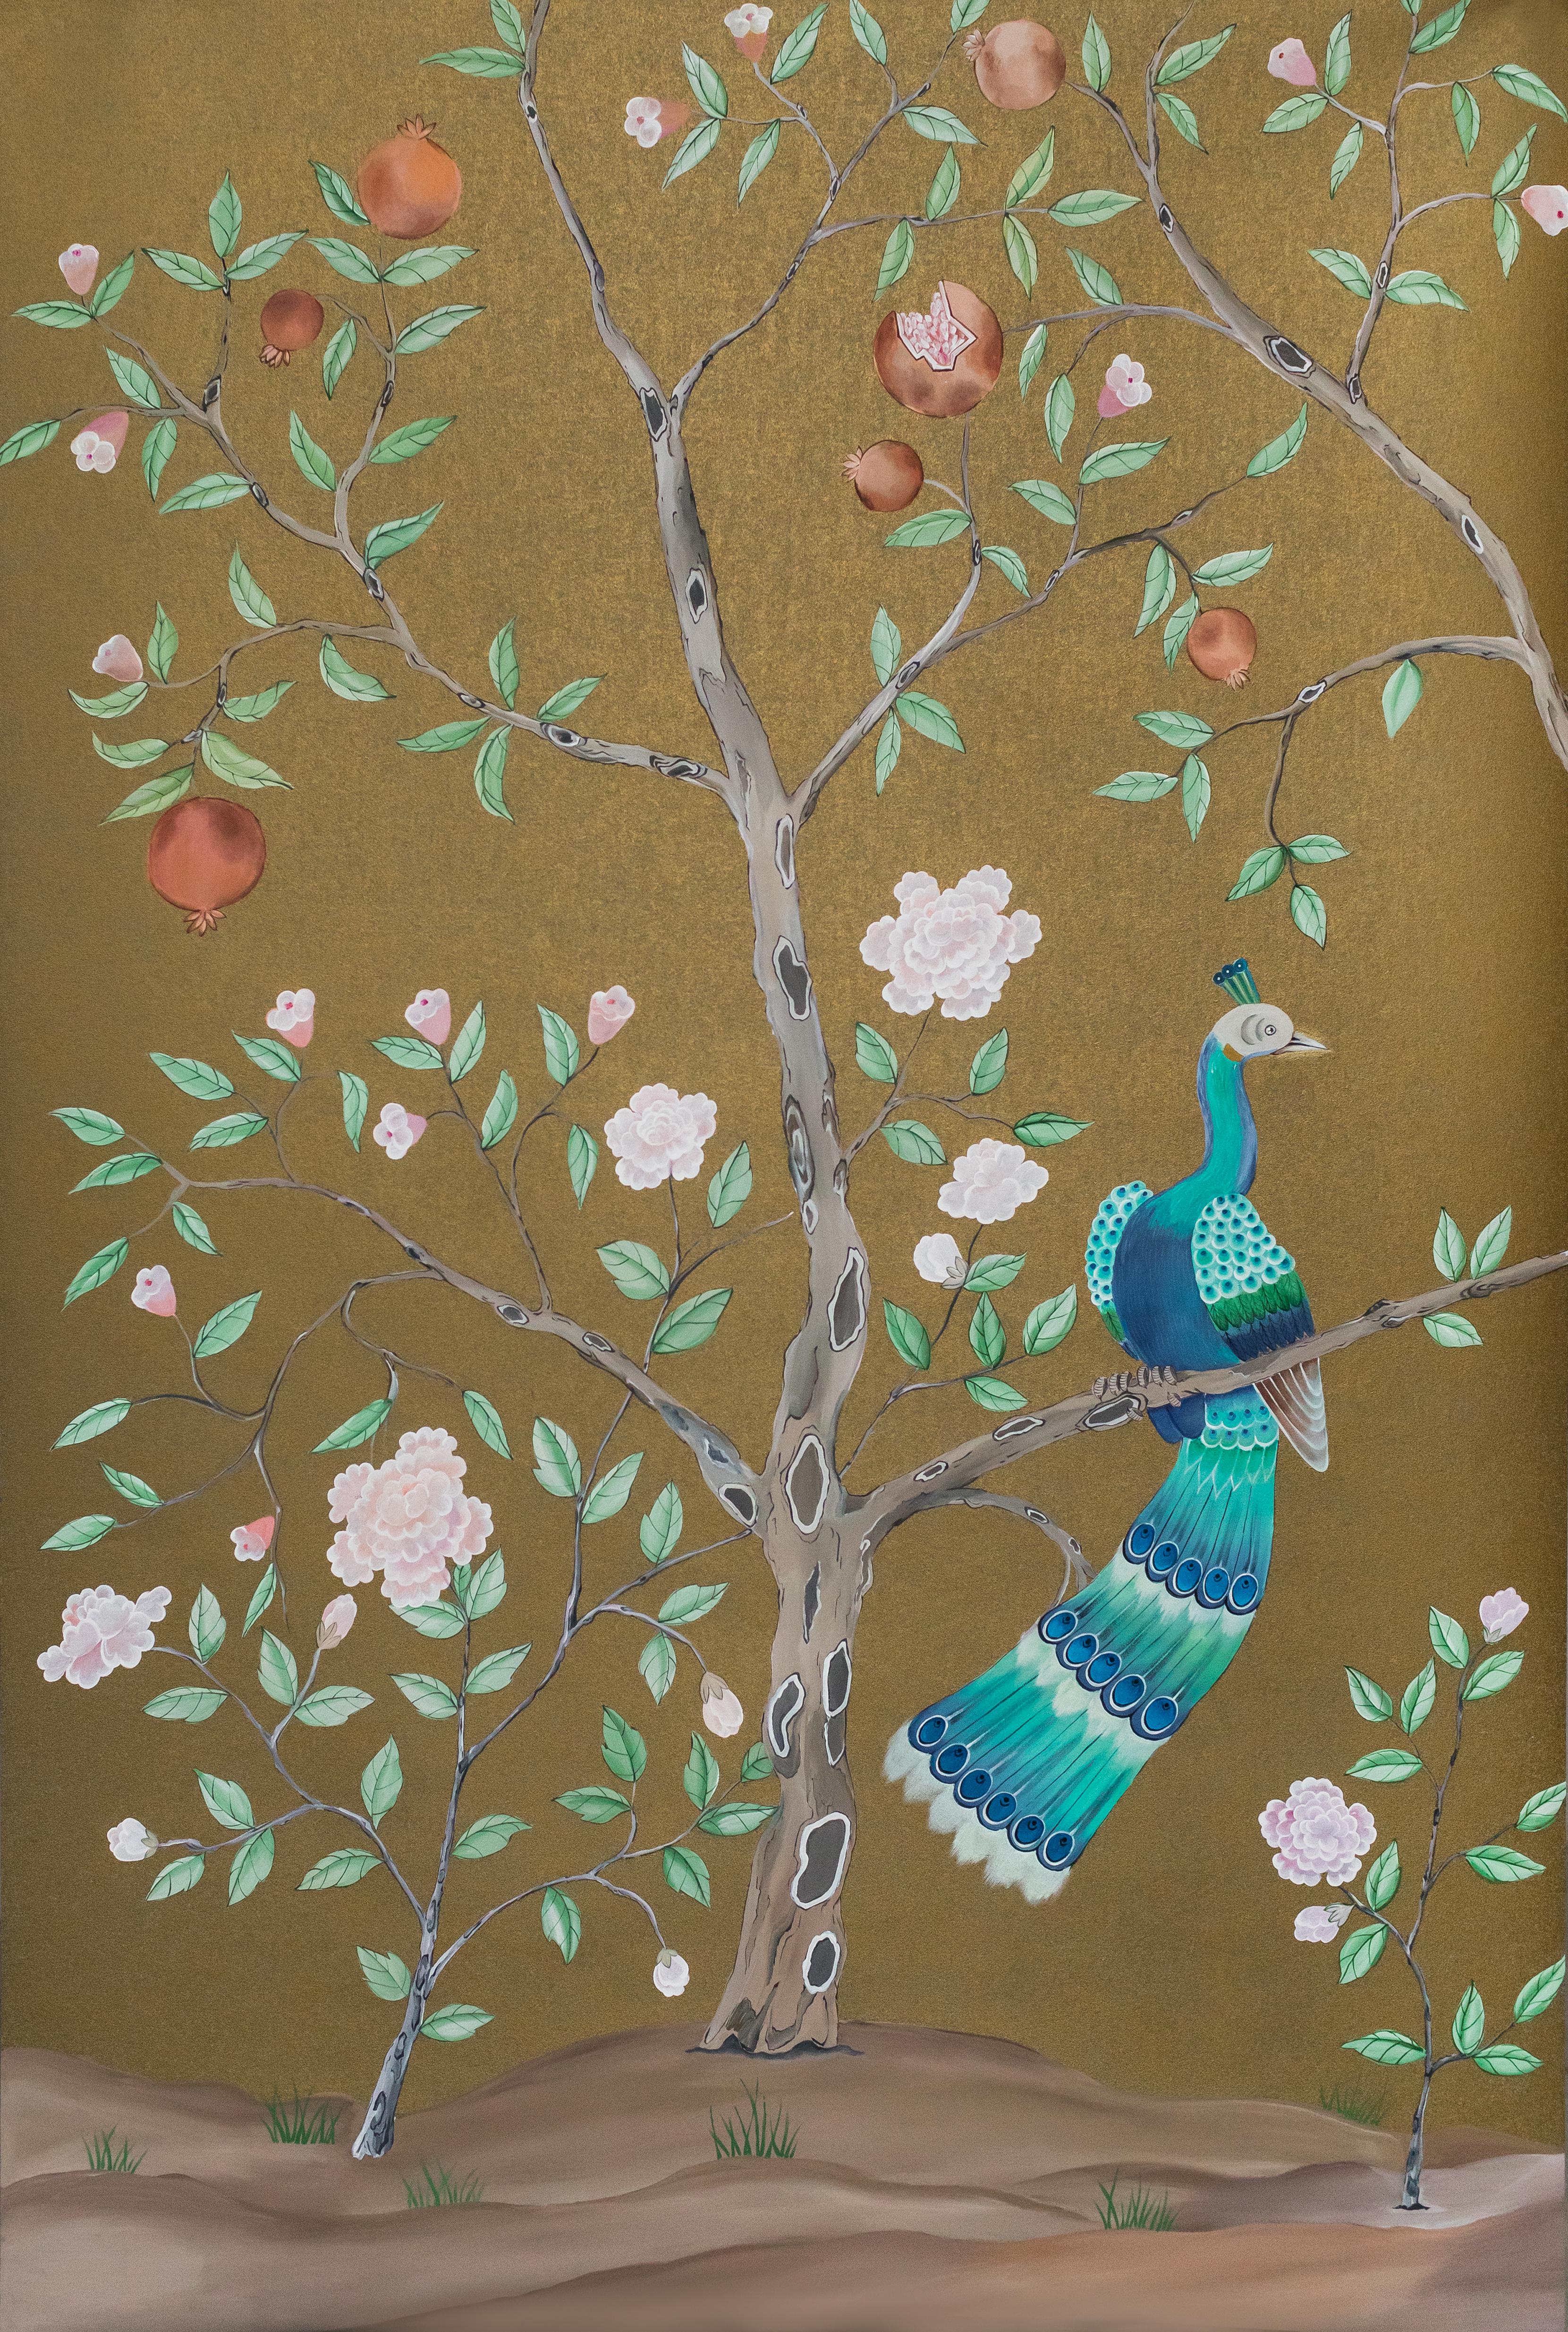 Peacock garden on dark gold background: an enchanted garden, featuring peacocks on pomegranate trees, inspired by a Qing Dynasty original. A set of three panels.

Our wallpapers and panels are produced with love and patience, the artists invest